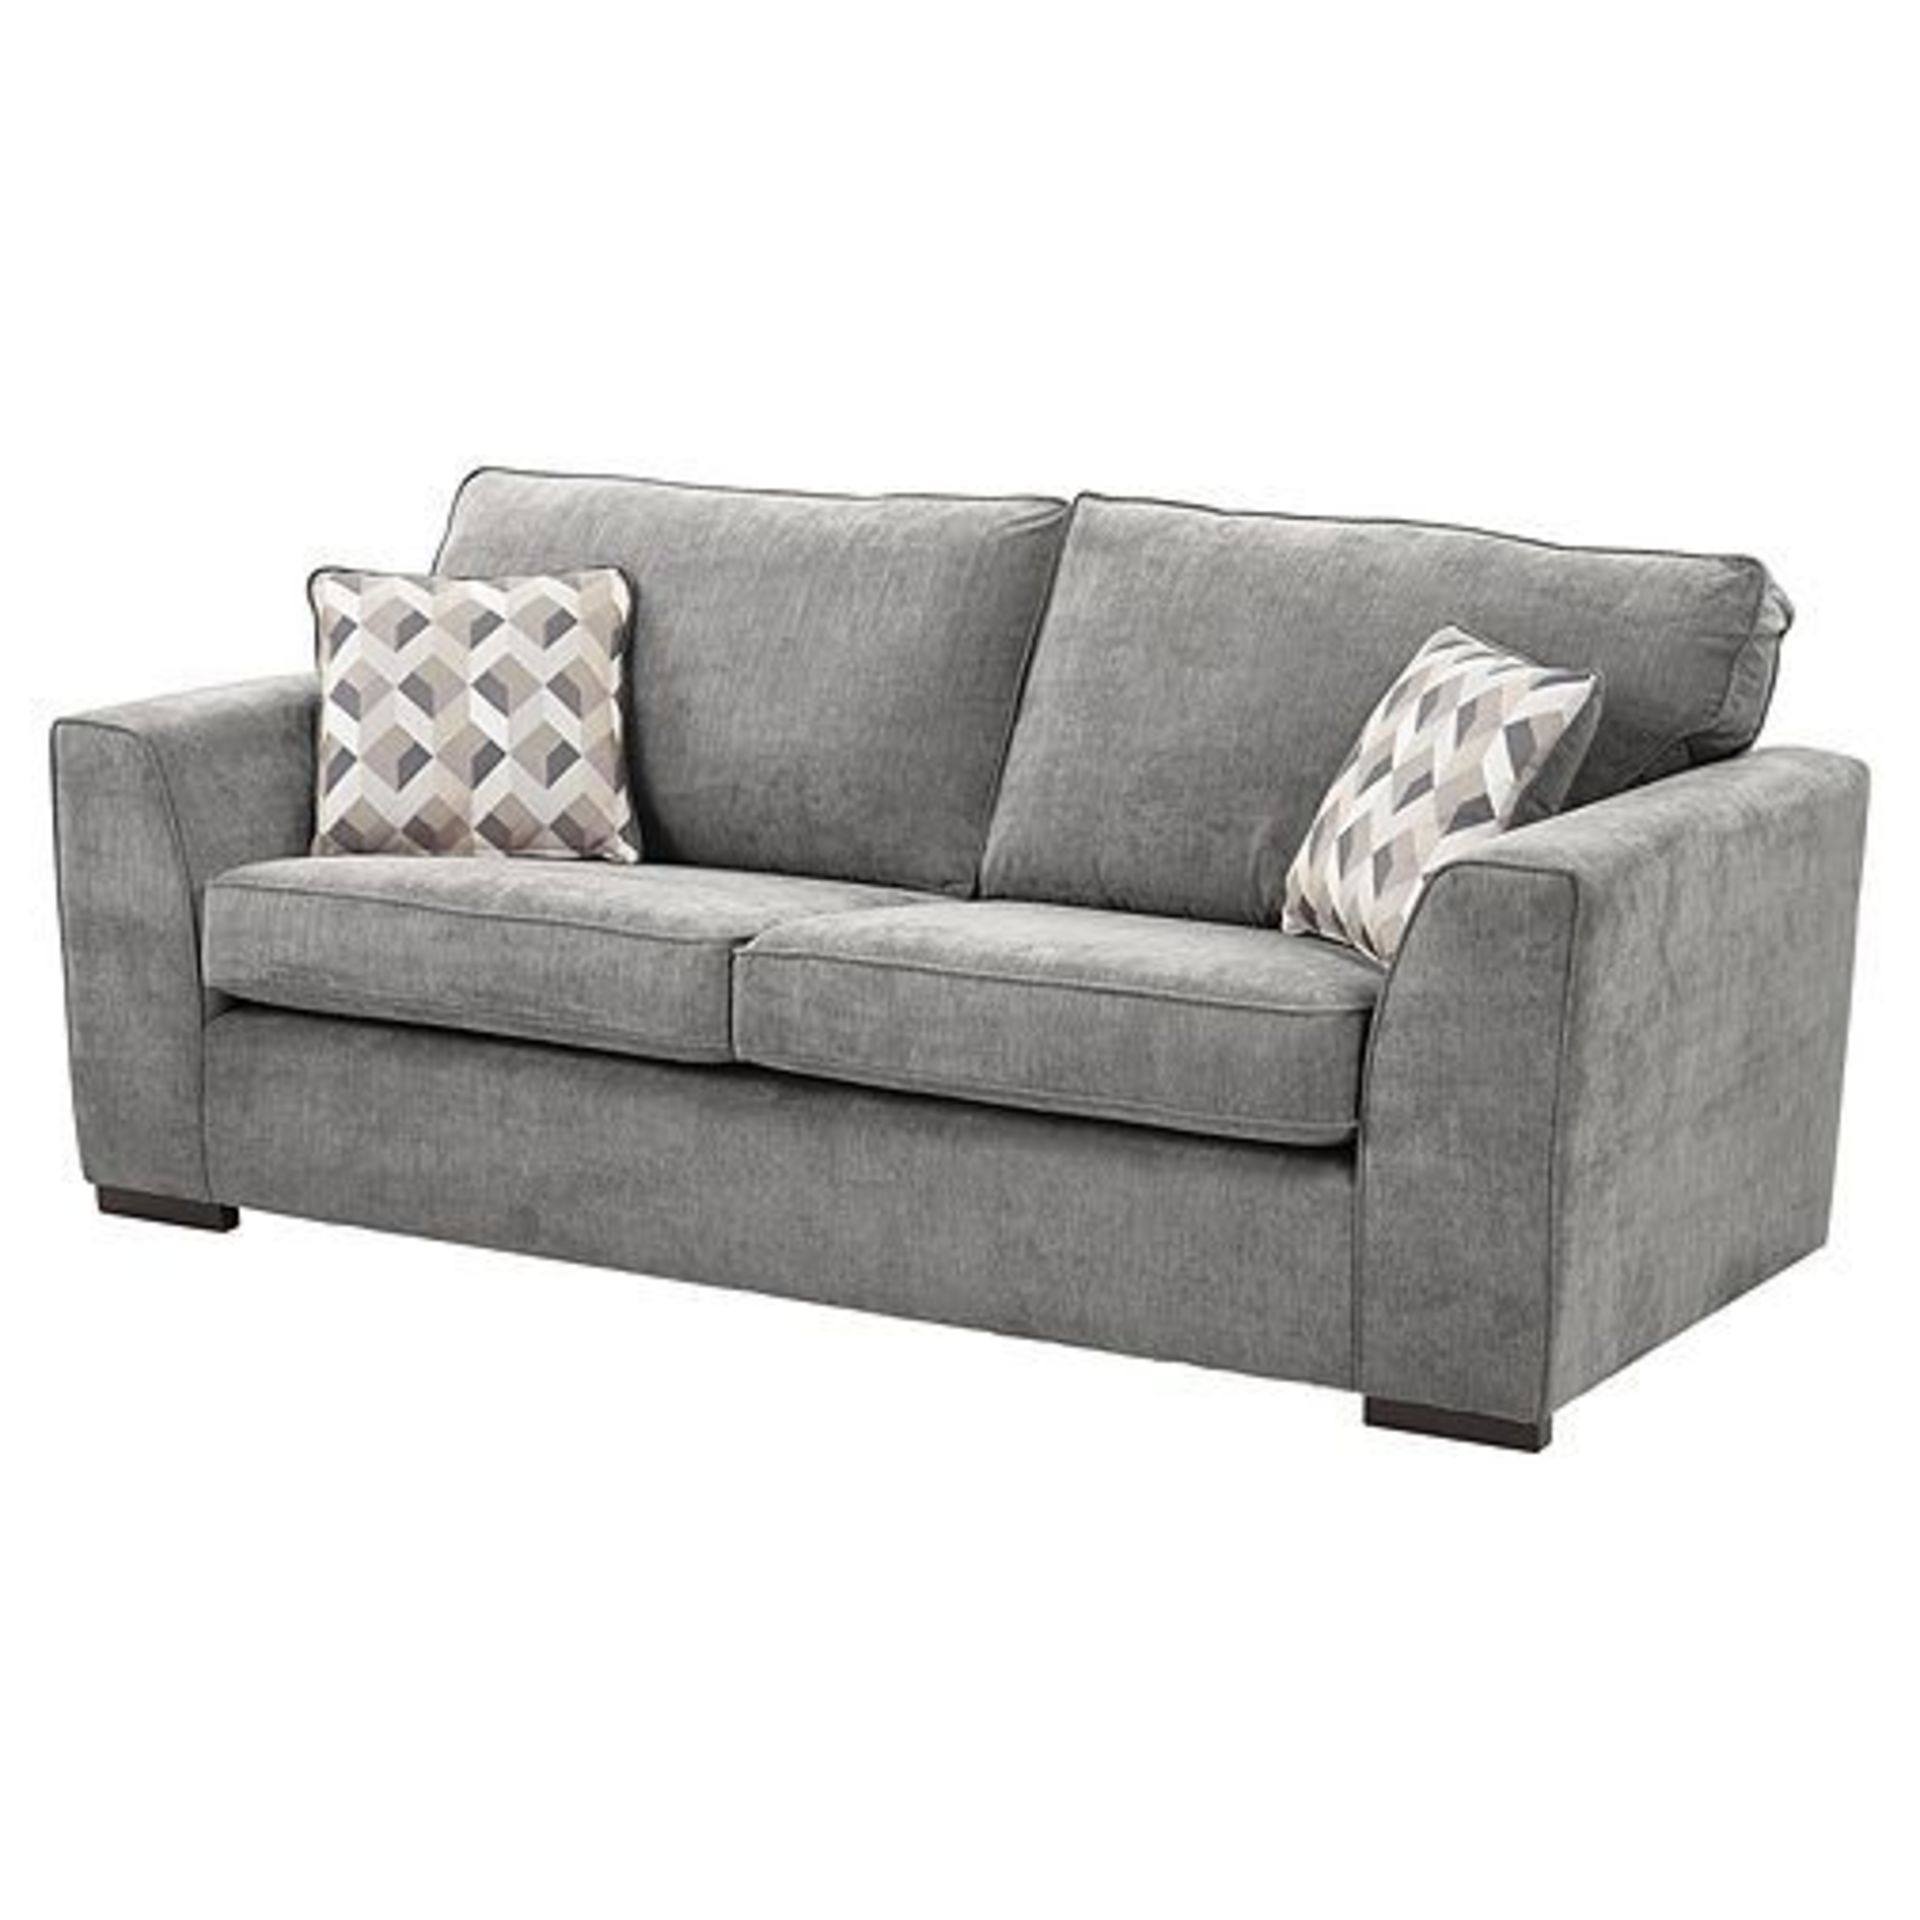 1 BRAND NEW BAGGED BOSTON 2.5 SEATER SOFA IN DARK GREY / 42592 (VIEWING HIGHLY RECOMMENDED)